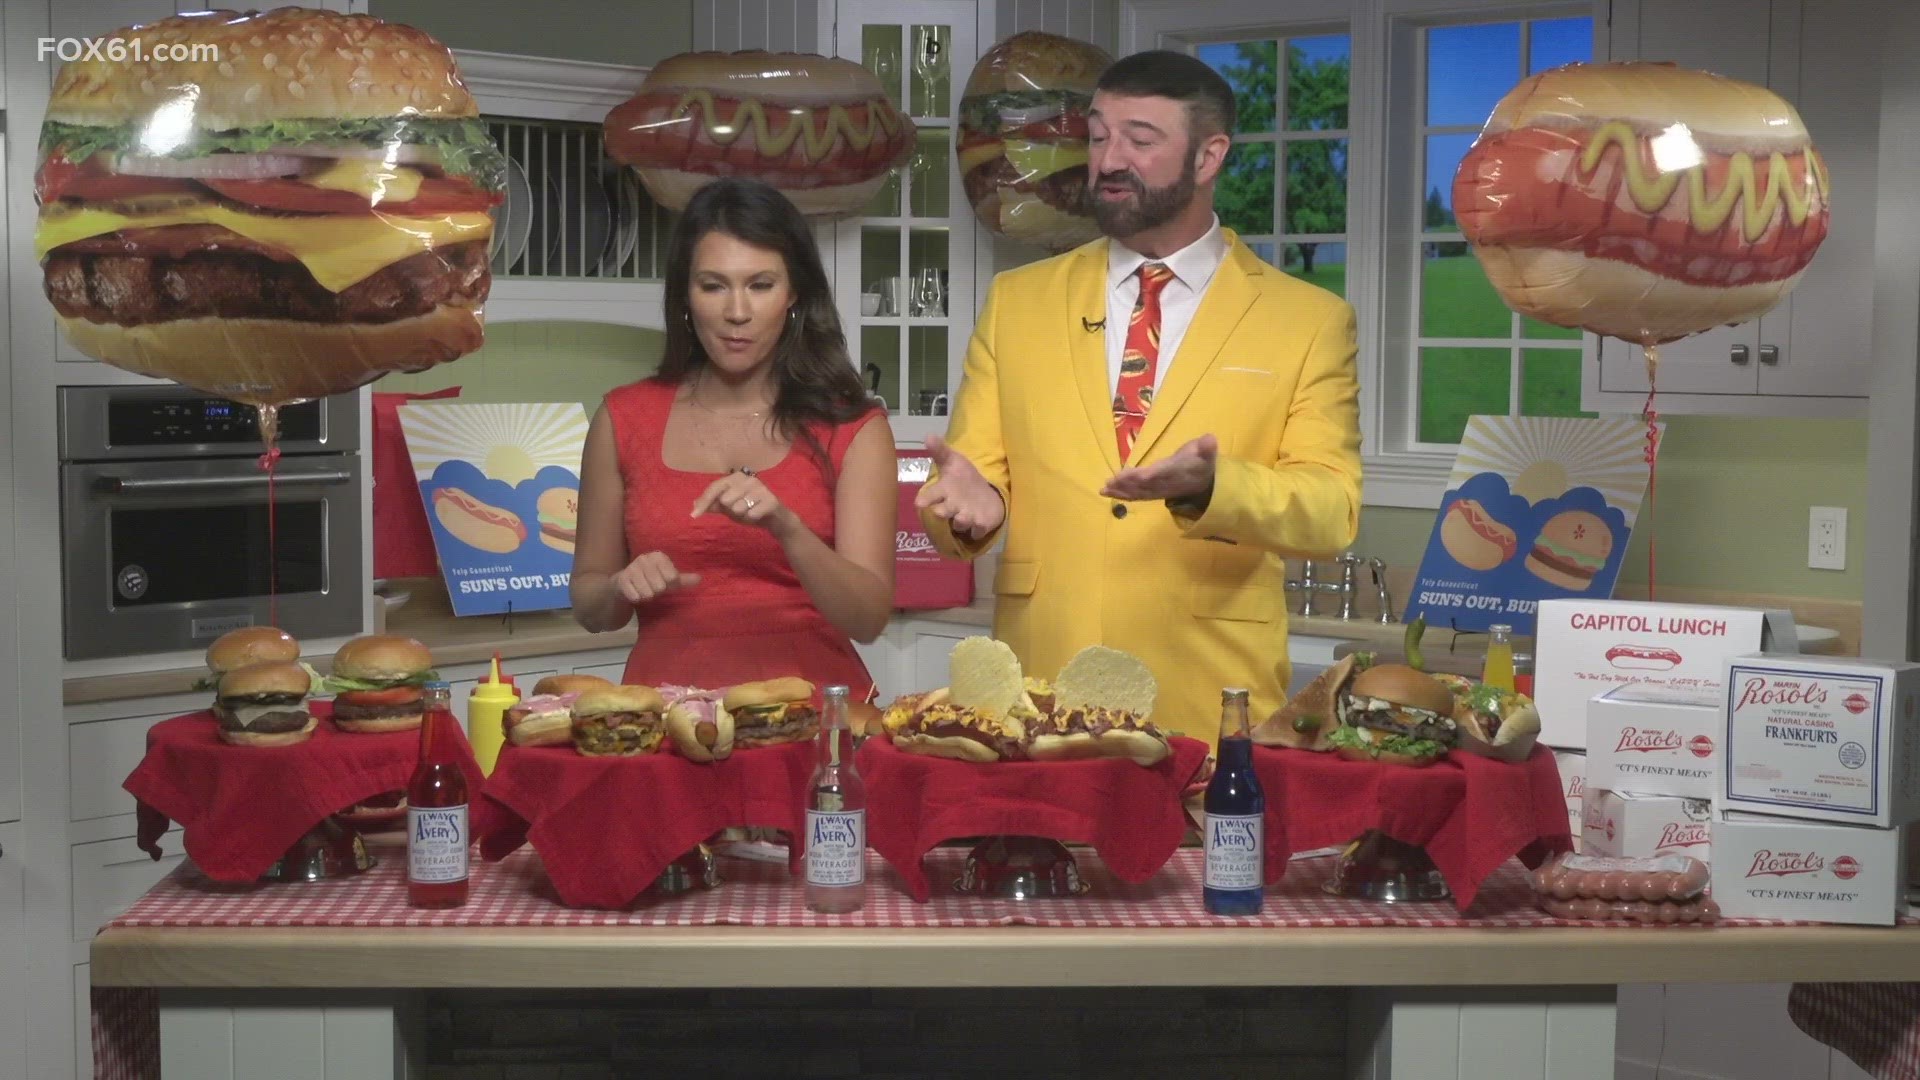 Yelp is here to show off some notable local eateries that have burgers and hotdogs perfect for Fourth of July weekend and summer picnics.